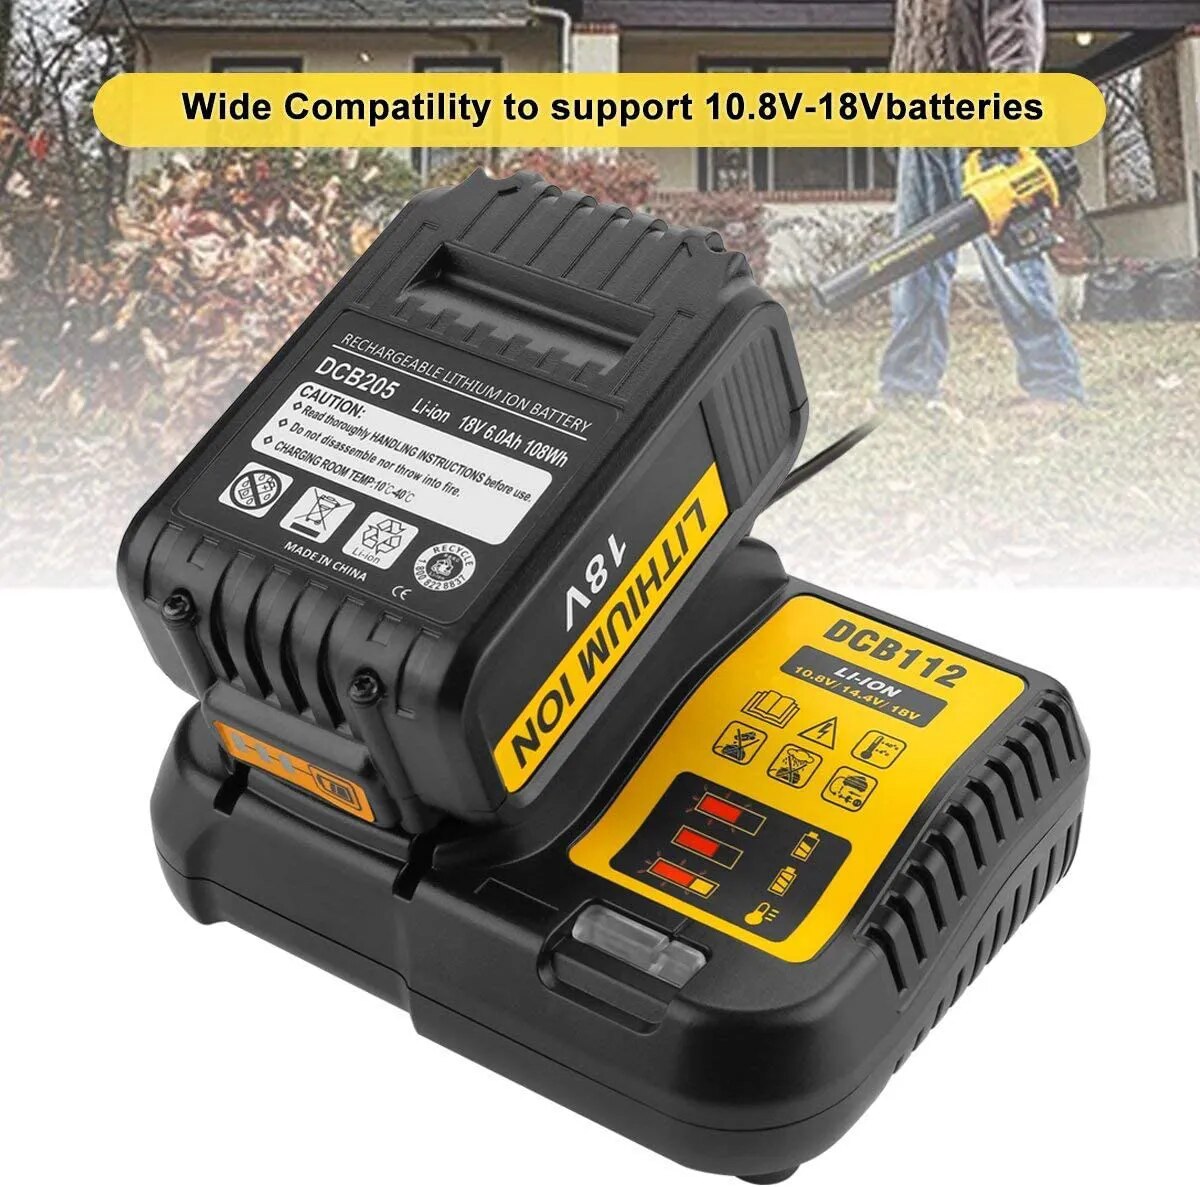 DCB112 Replacement Li-Ion Battery Charger for Dewalt 12 V 14.4V 18V Lithium Cells Battery Charger Best price - RY MARKET PLACE